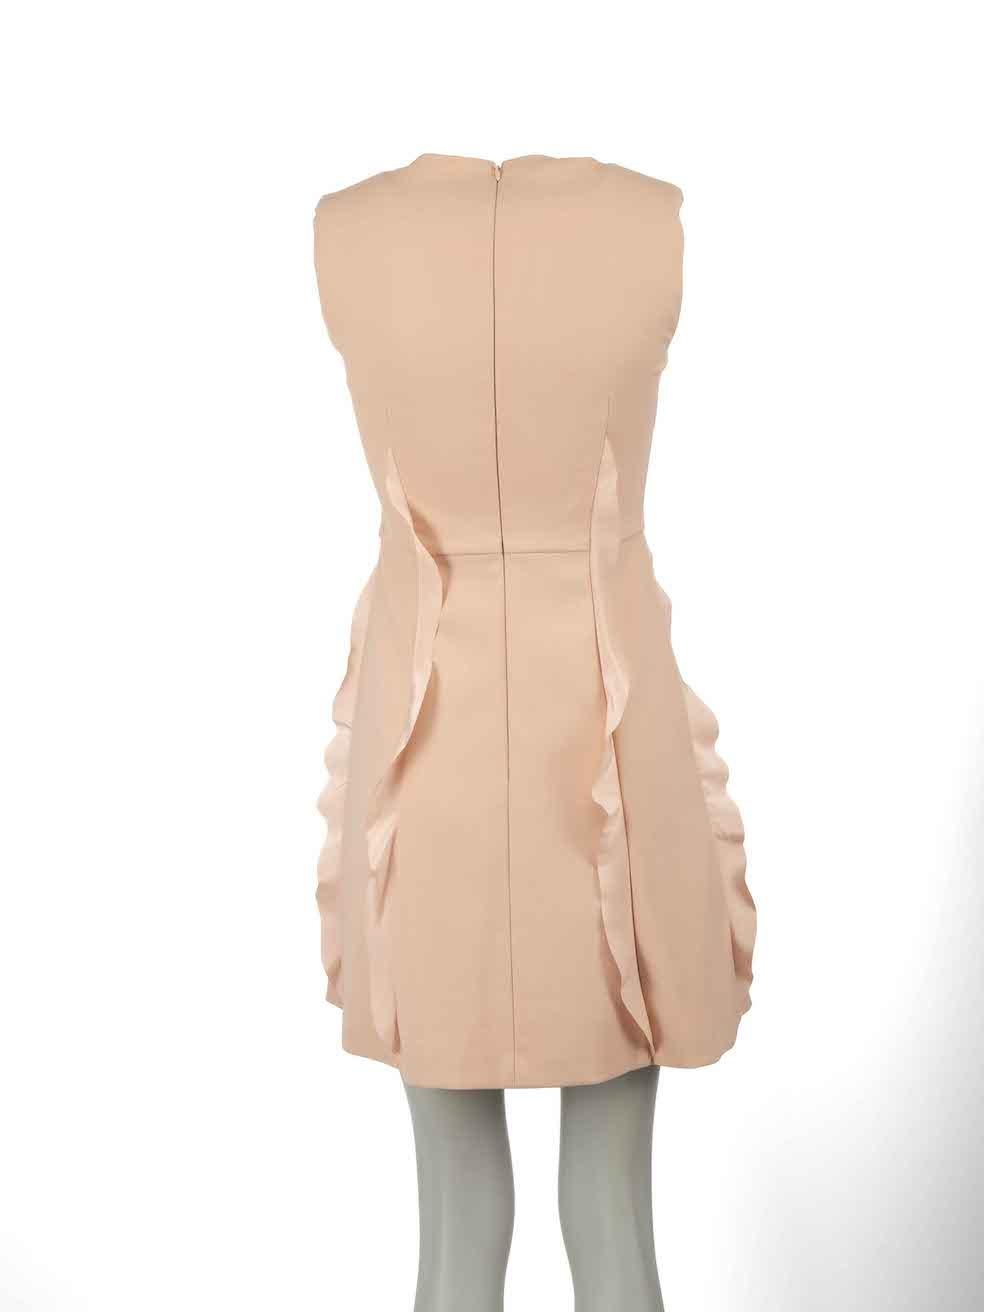 Valentino RED Valentino Pink Sleeveless Ruffle Mini Dress Size XXS In Excellent Condition For Sale In London, GB